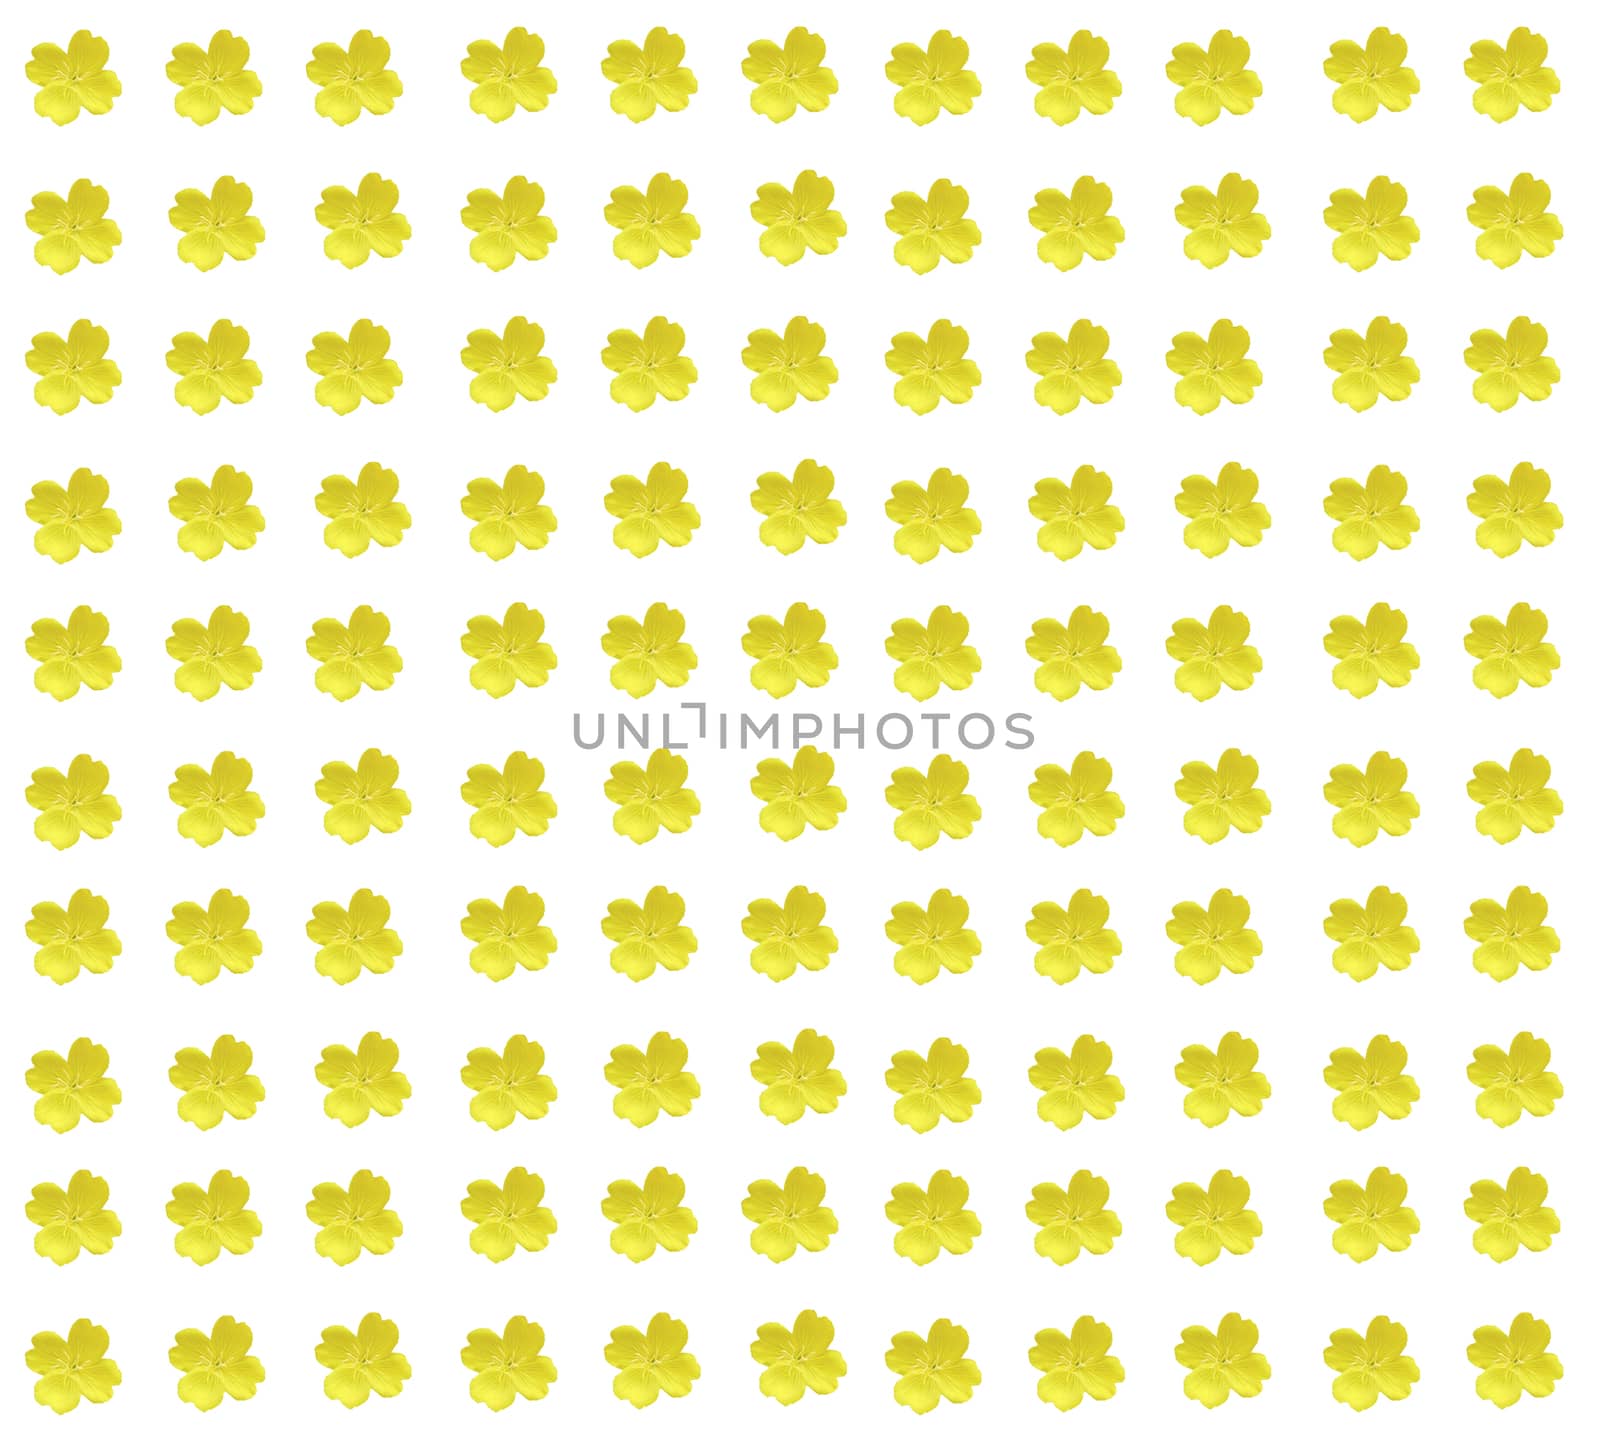 Many small yellow colors for the background